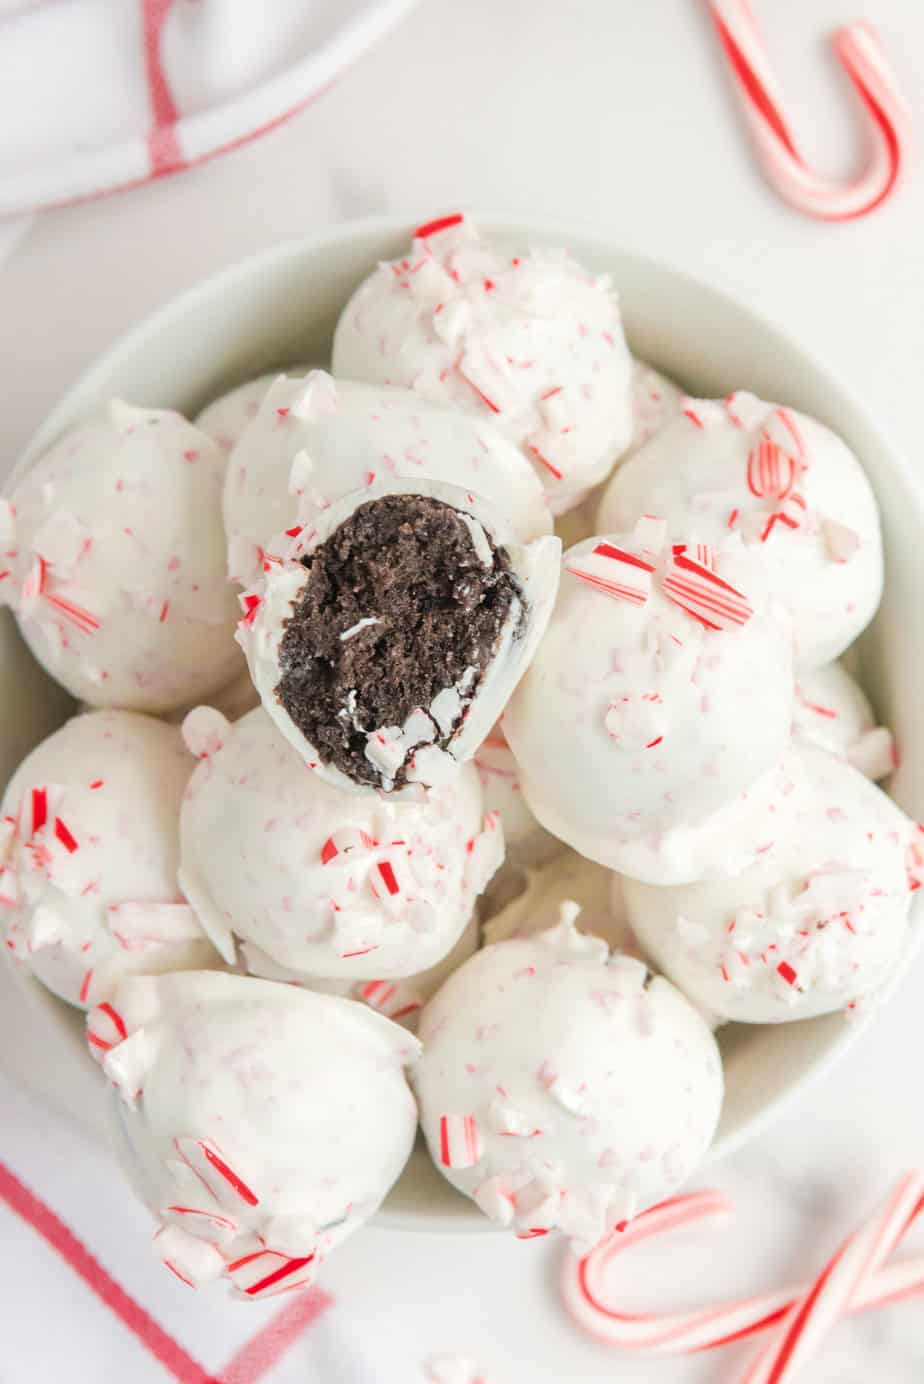 Peppermint Oreo balls in a bowl from overehead on a counter with more candy canes on the counter nearby and one truffle missing a bite.